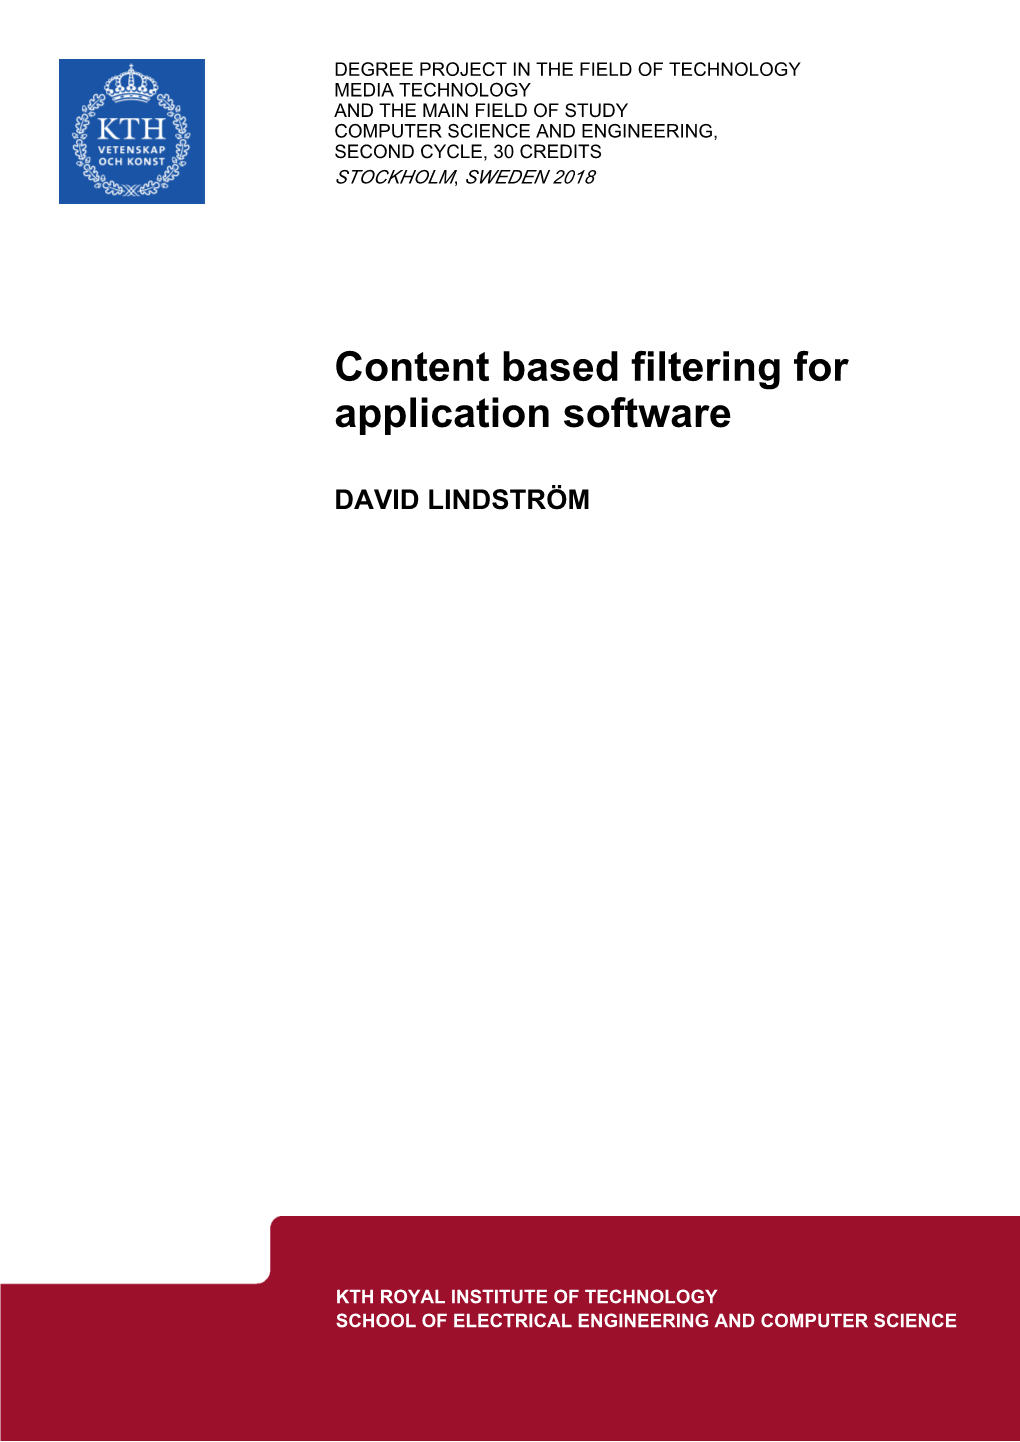 Content Based Filtering for Application Software